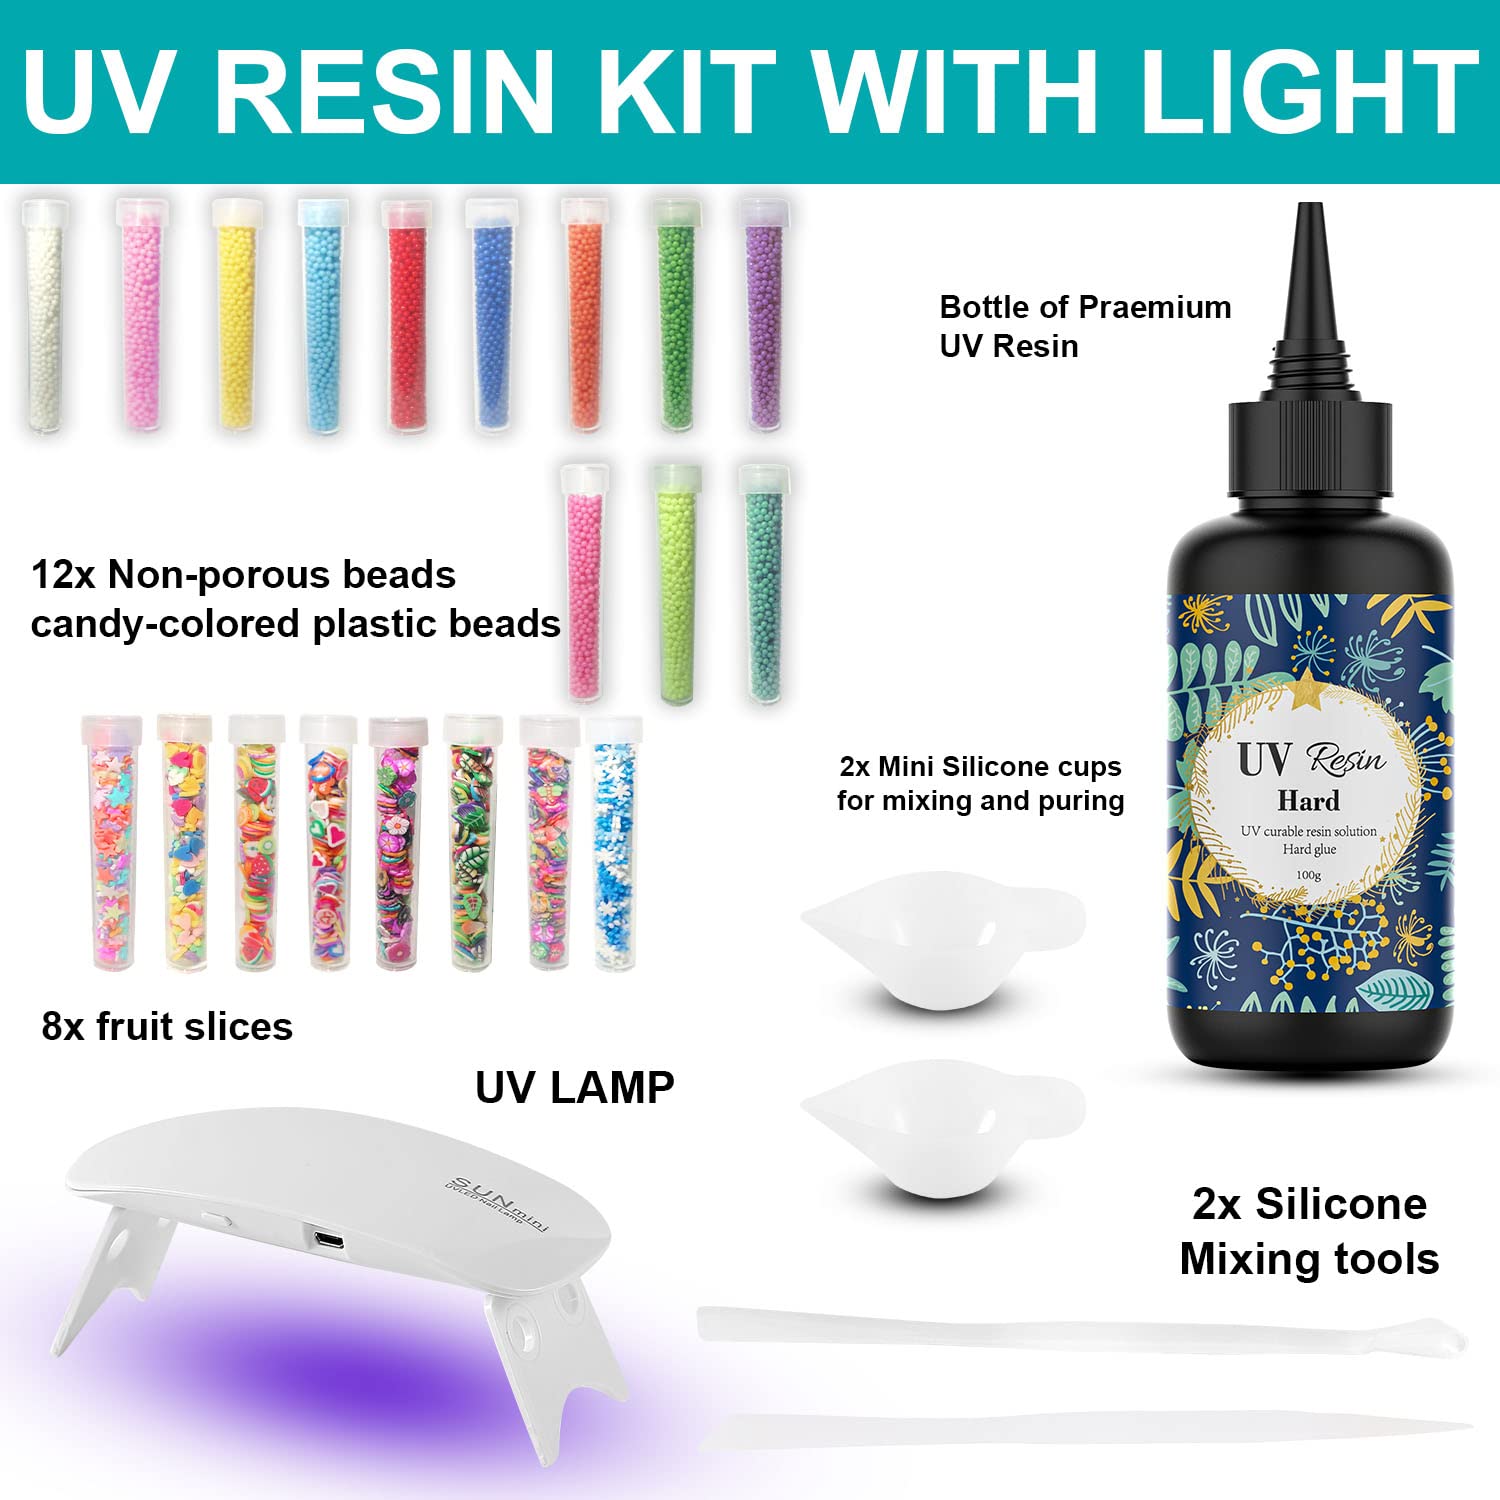 UV Resin Kit with Light -100g Upgraded Crystal Clear Hard for UV Resin  Casting DIY Kits Ultraviolet Curing Resin,UV Resin Set Supplies Art Crafts  DIY Necklace Pendant Jewelry Making